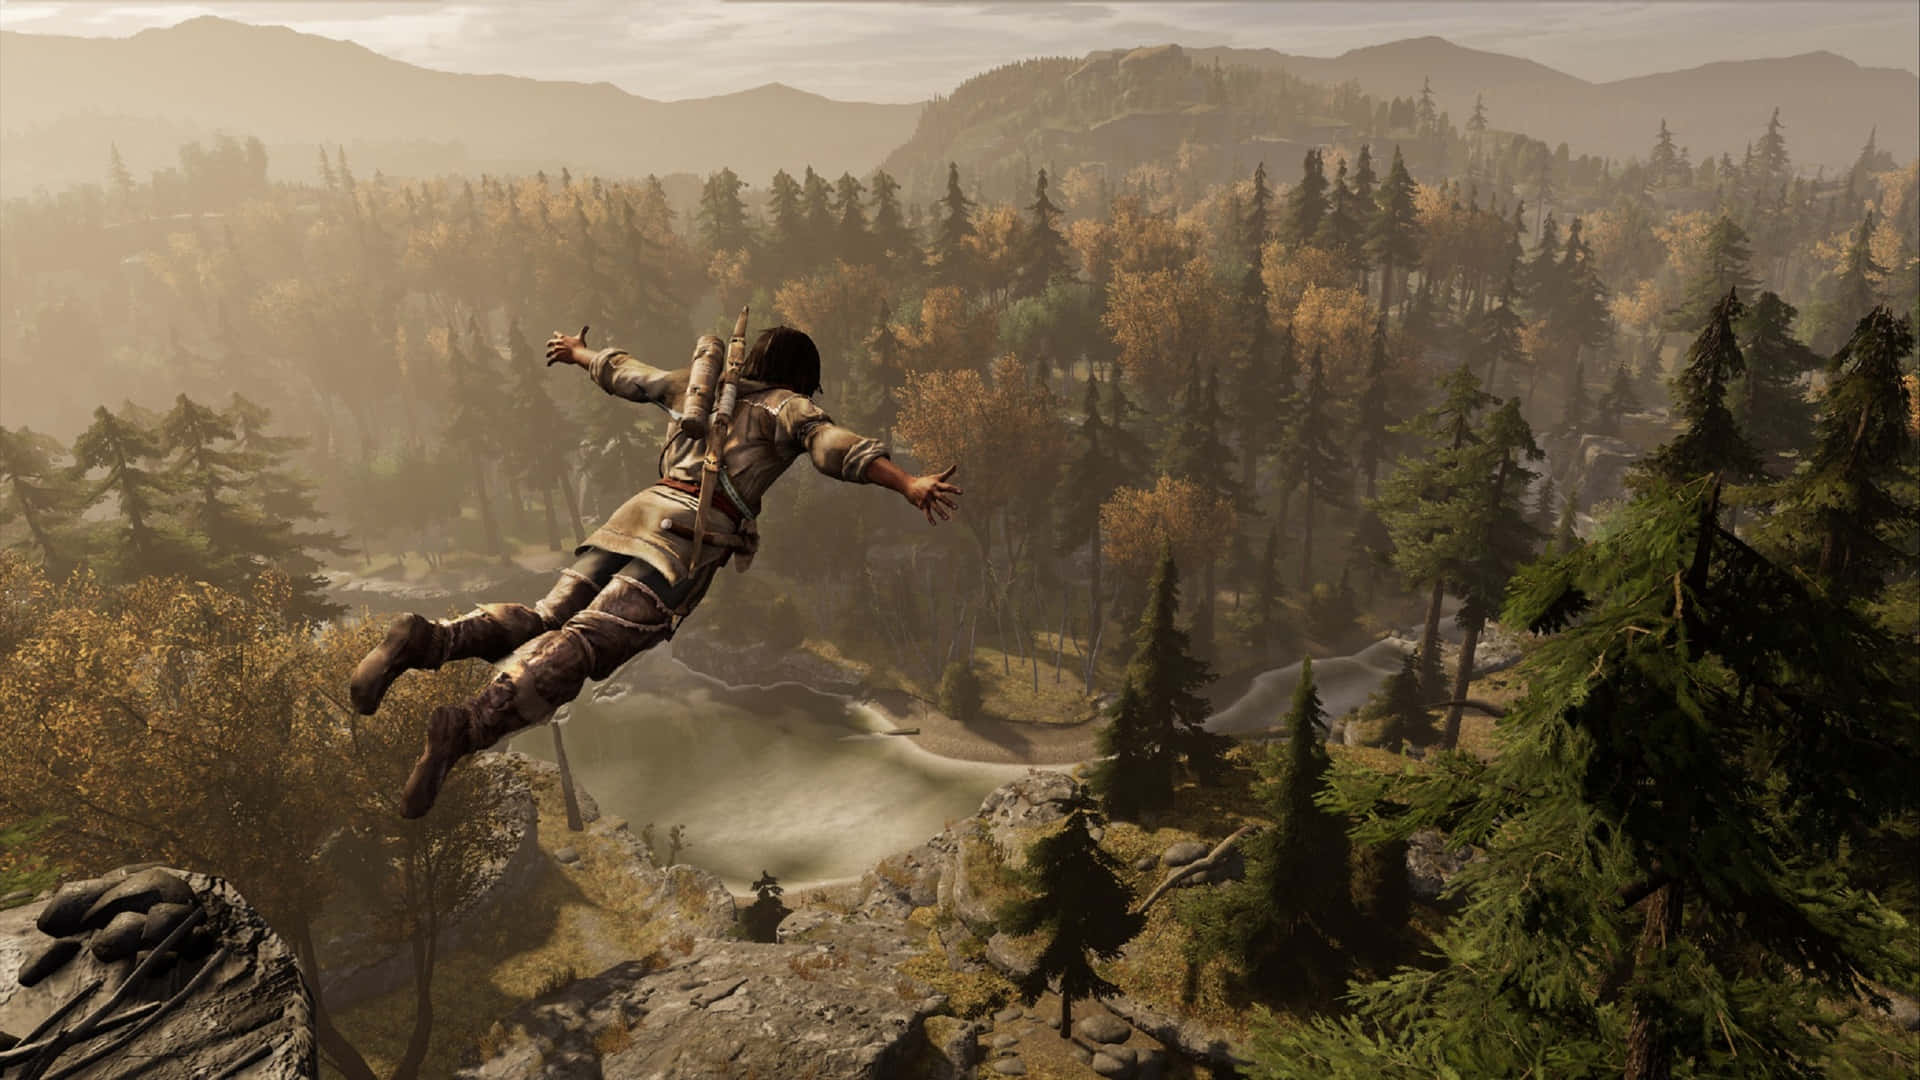 A Man Is Flying Over A Cliff In A Video Game